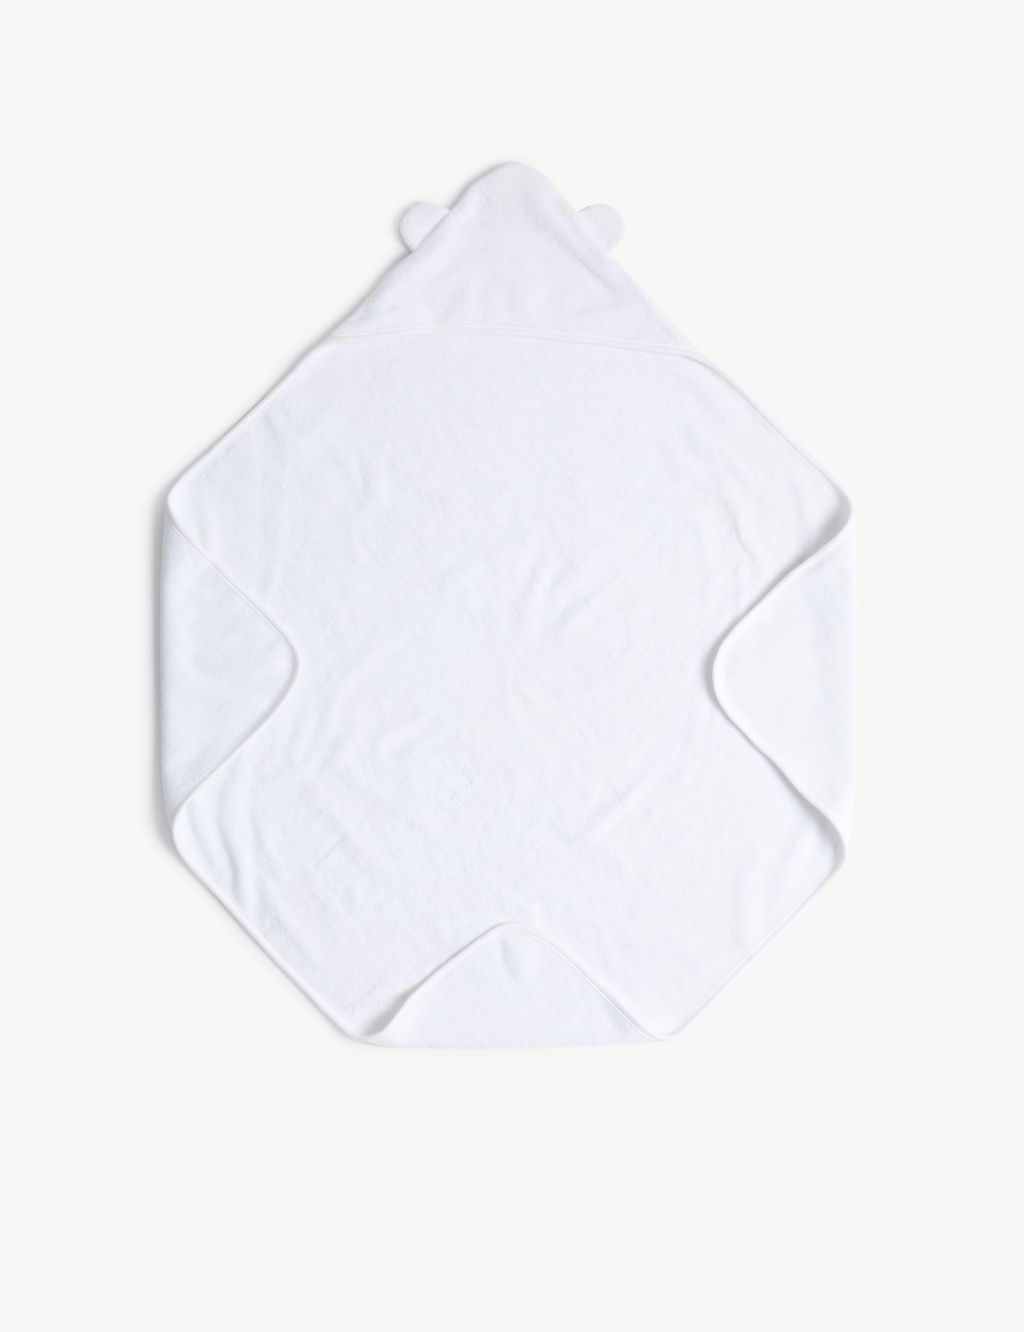 Cotton Rich Hooded Towel image 4